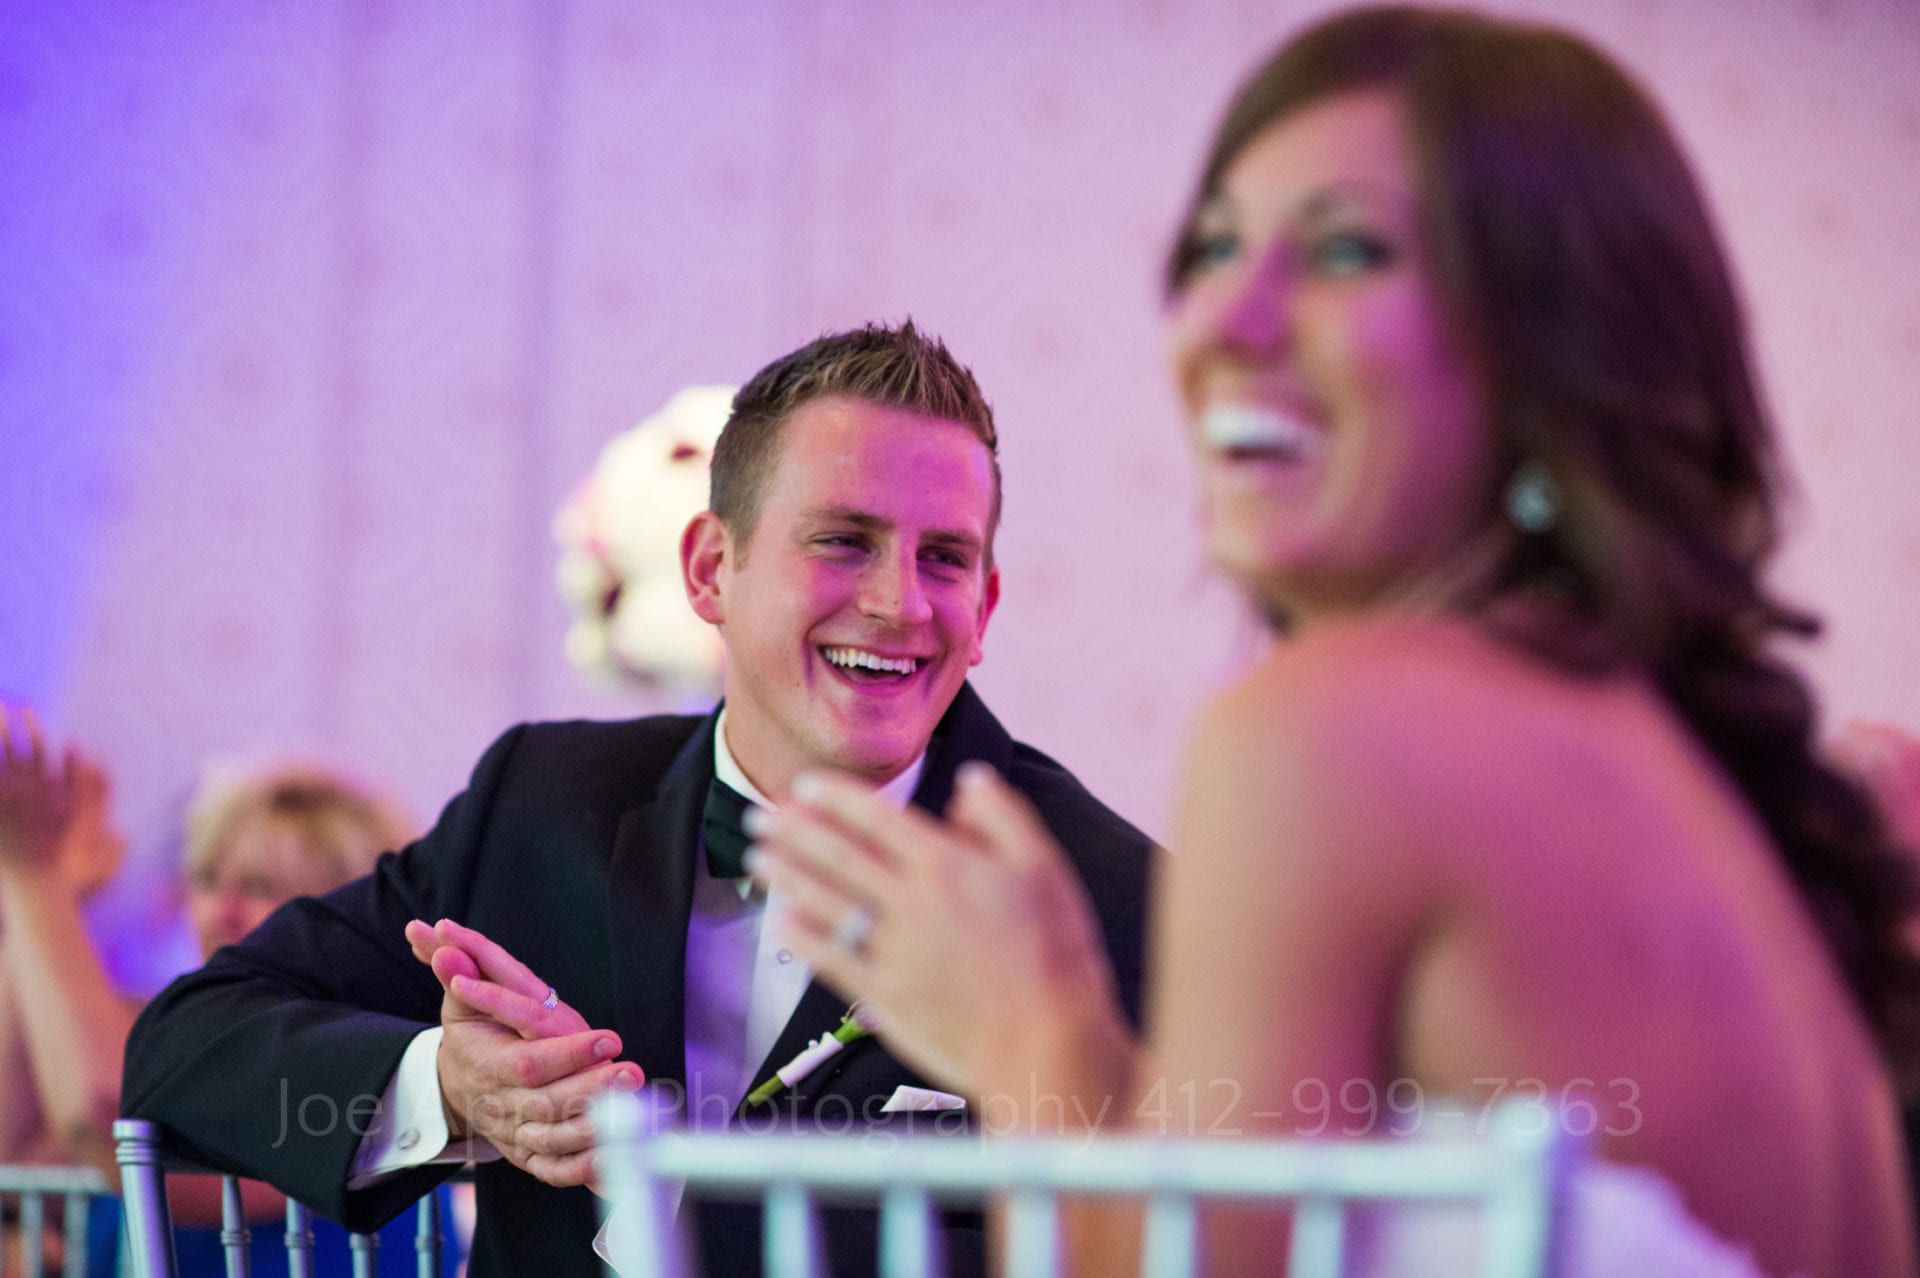 A groom looks at his bride as they both sit in chairs and applaud while listening to speeches Fairmont Hotel Pittsburgh Weddings.